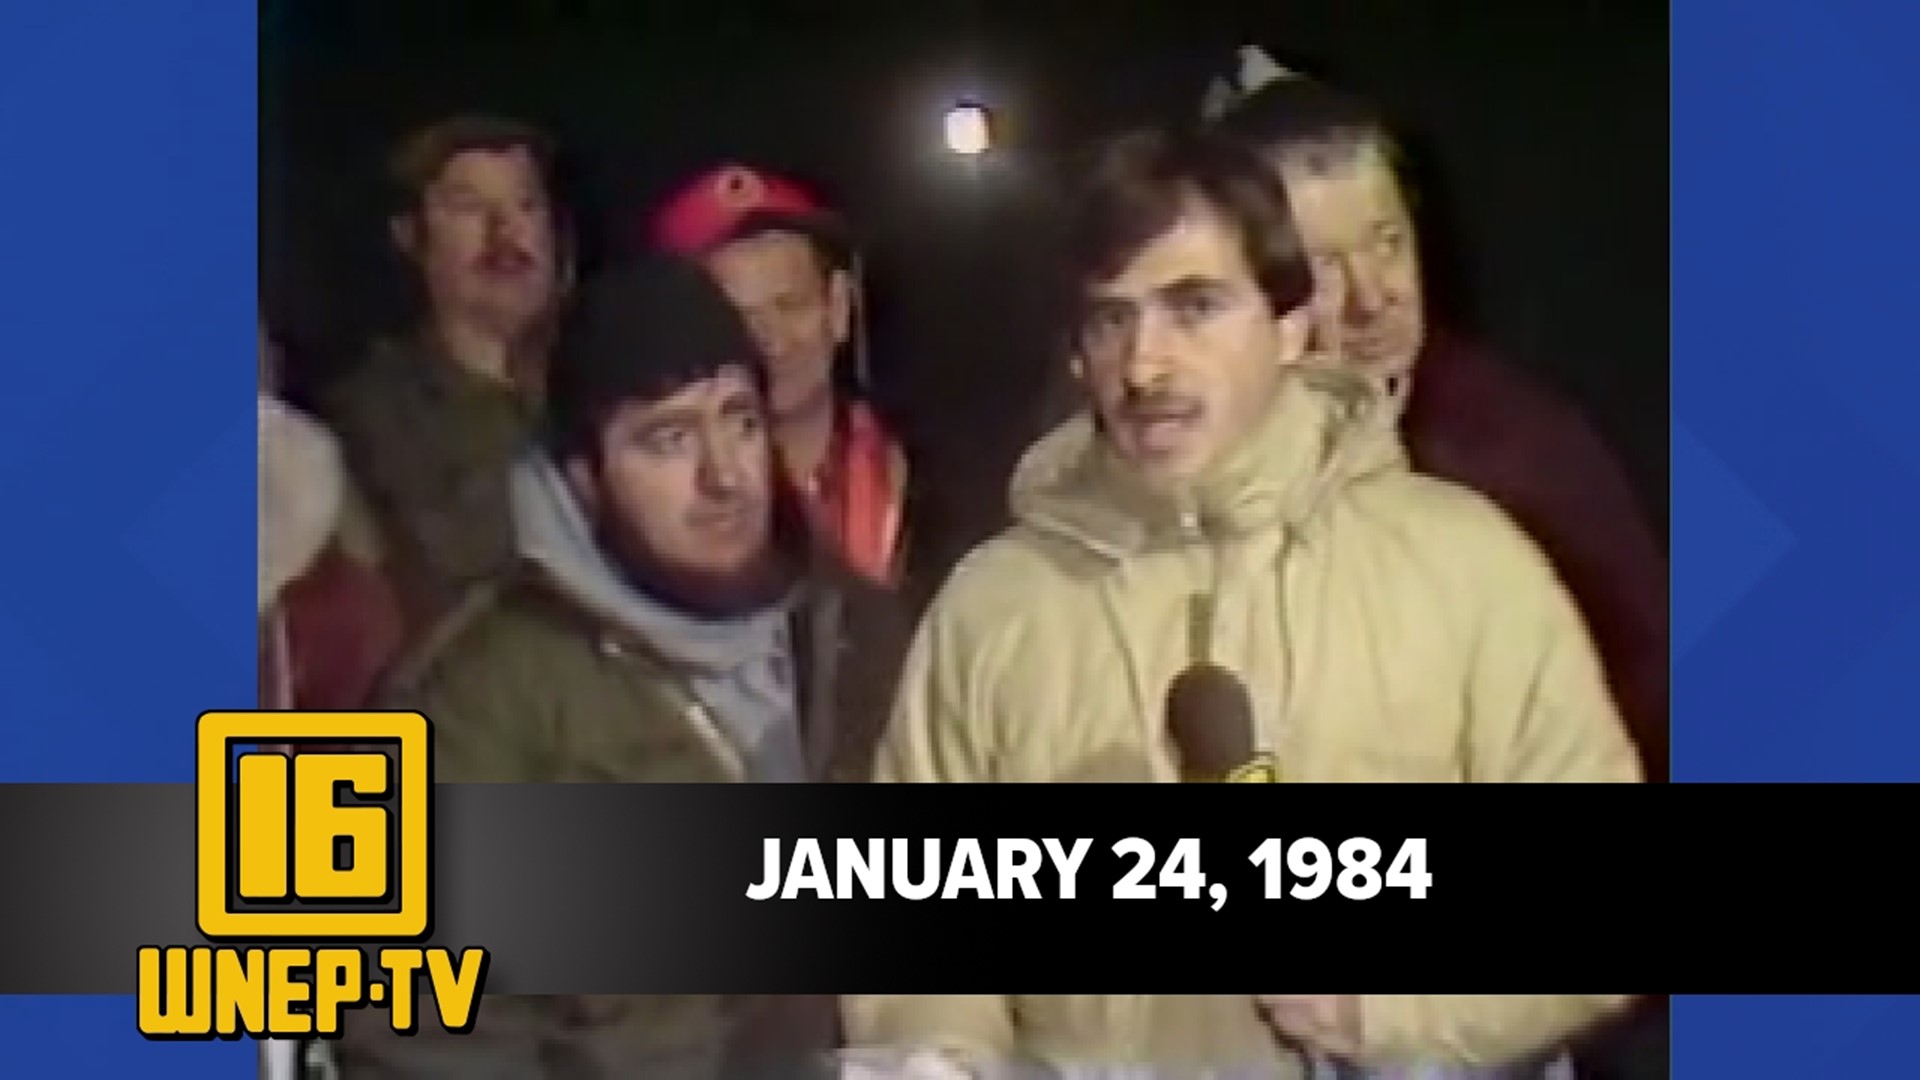 Join Karen Harch and Nolan Johannes with curated stories from January 24, 1984.